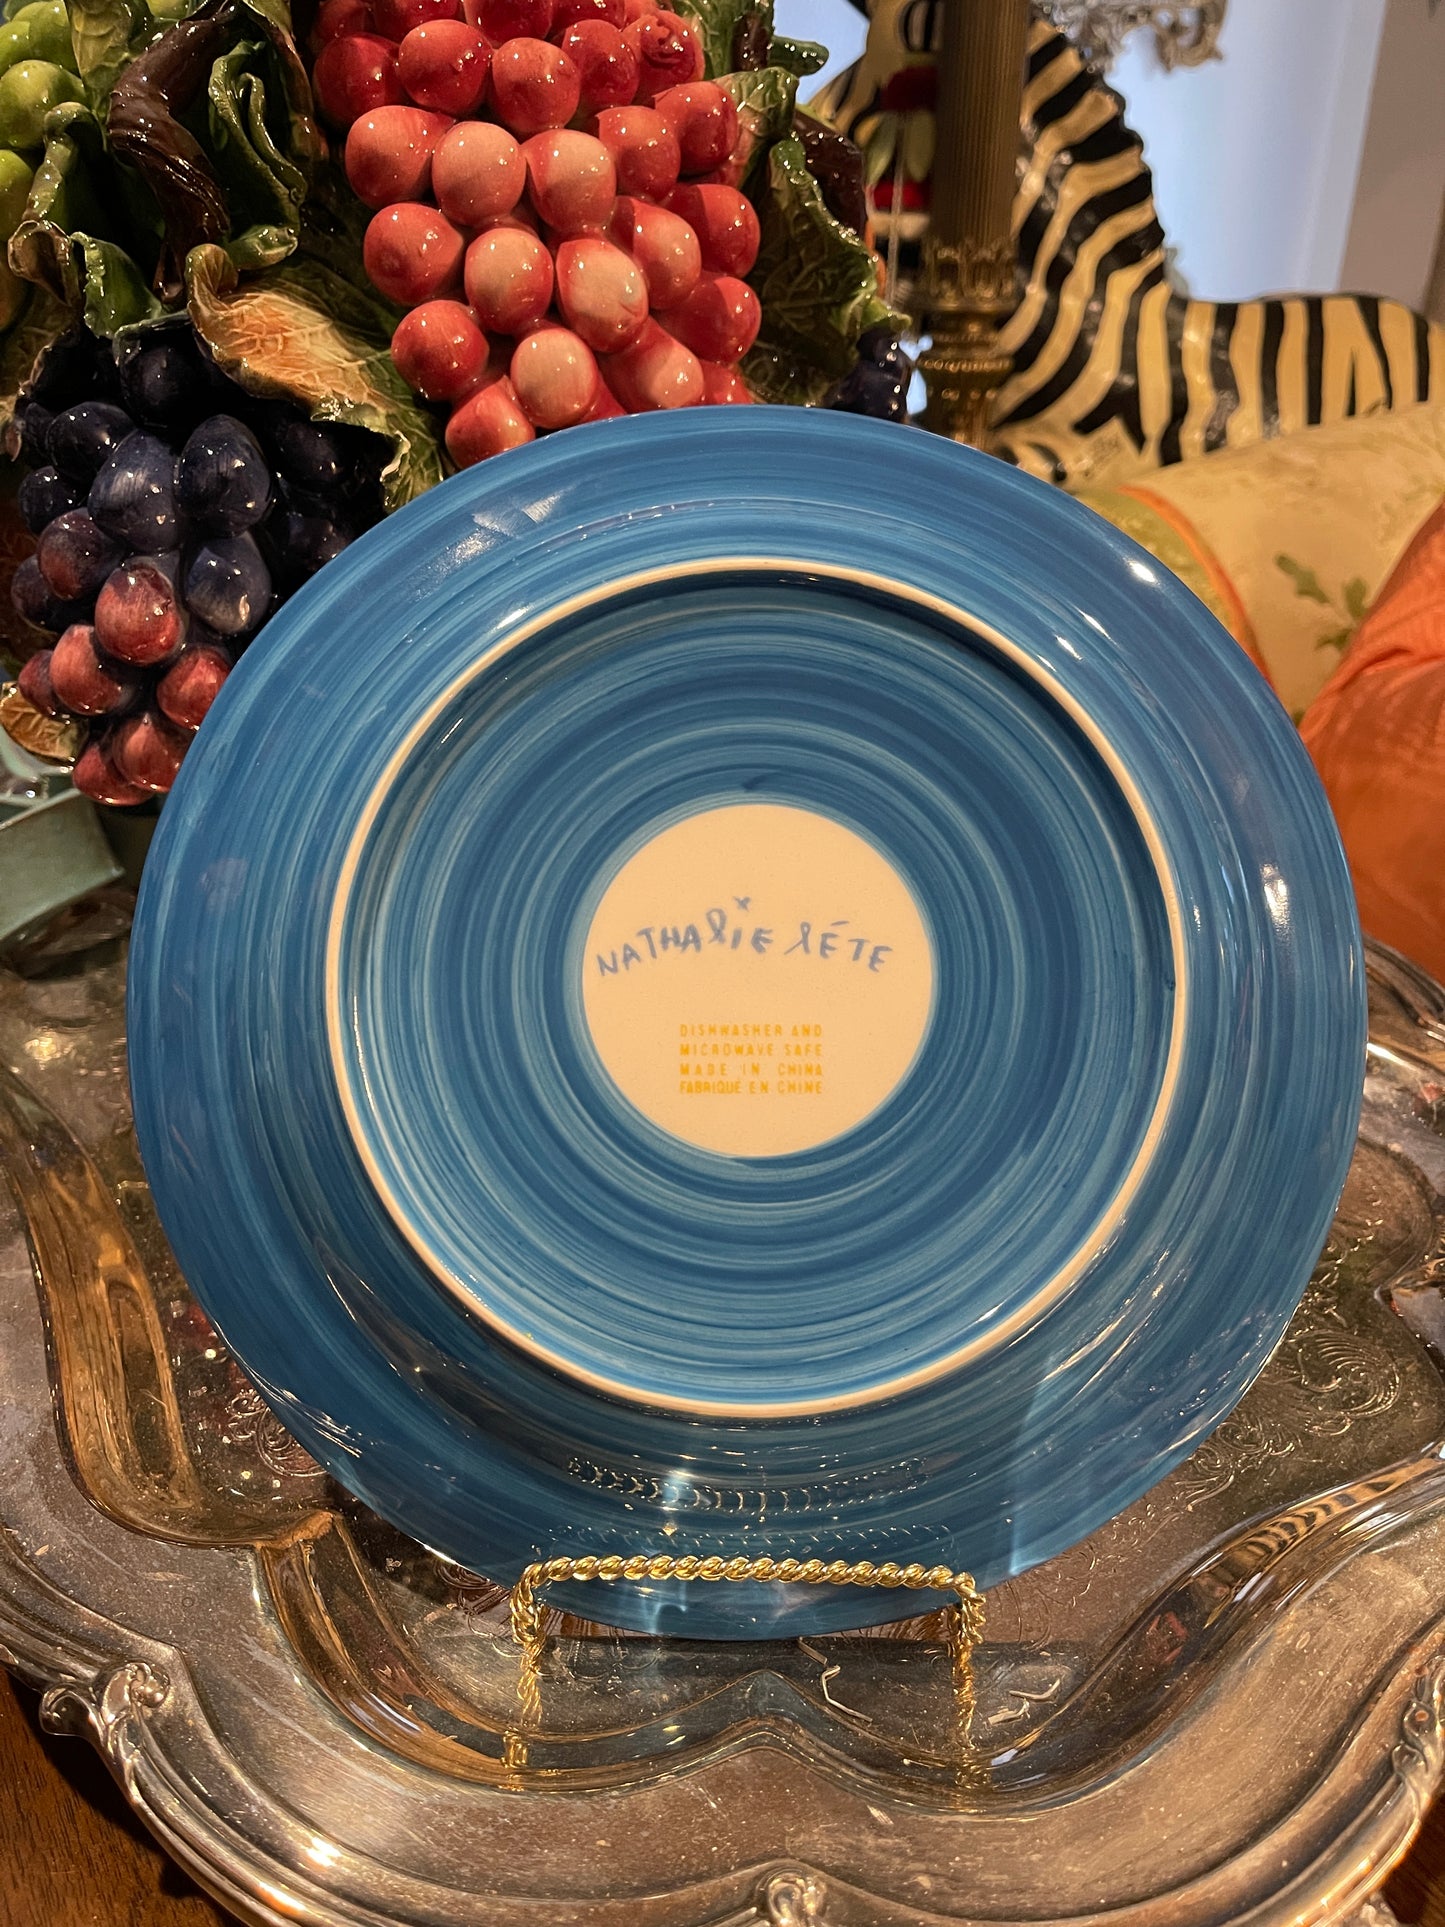 Pekingnese NATHALIE LETE Anthropologie Plate, Vibrantly colored and fancifully designed